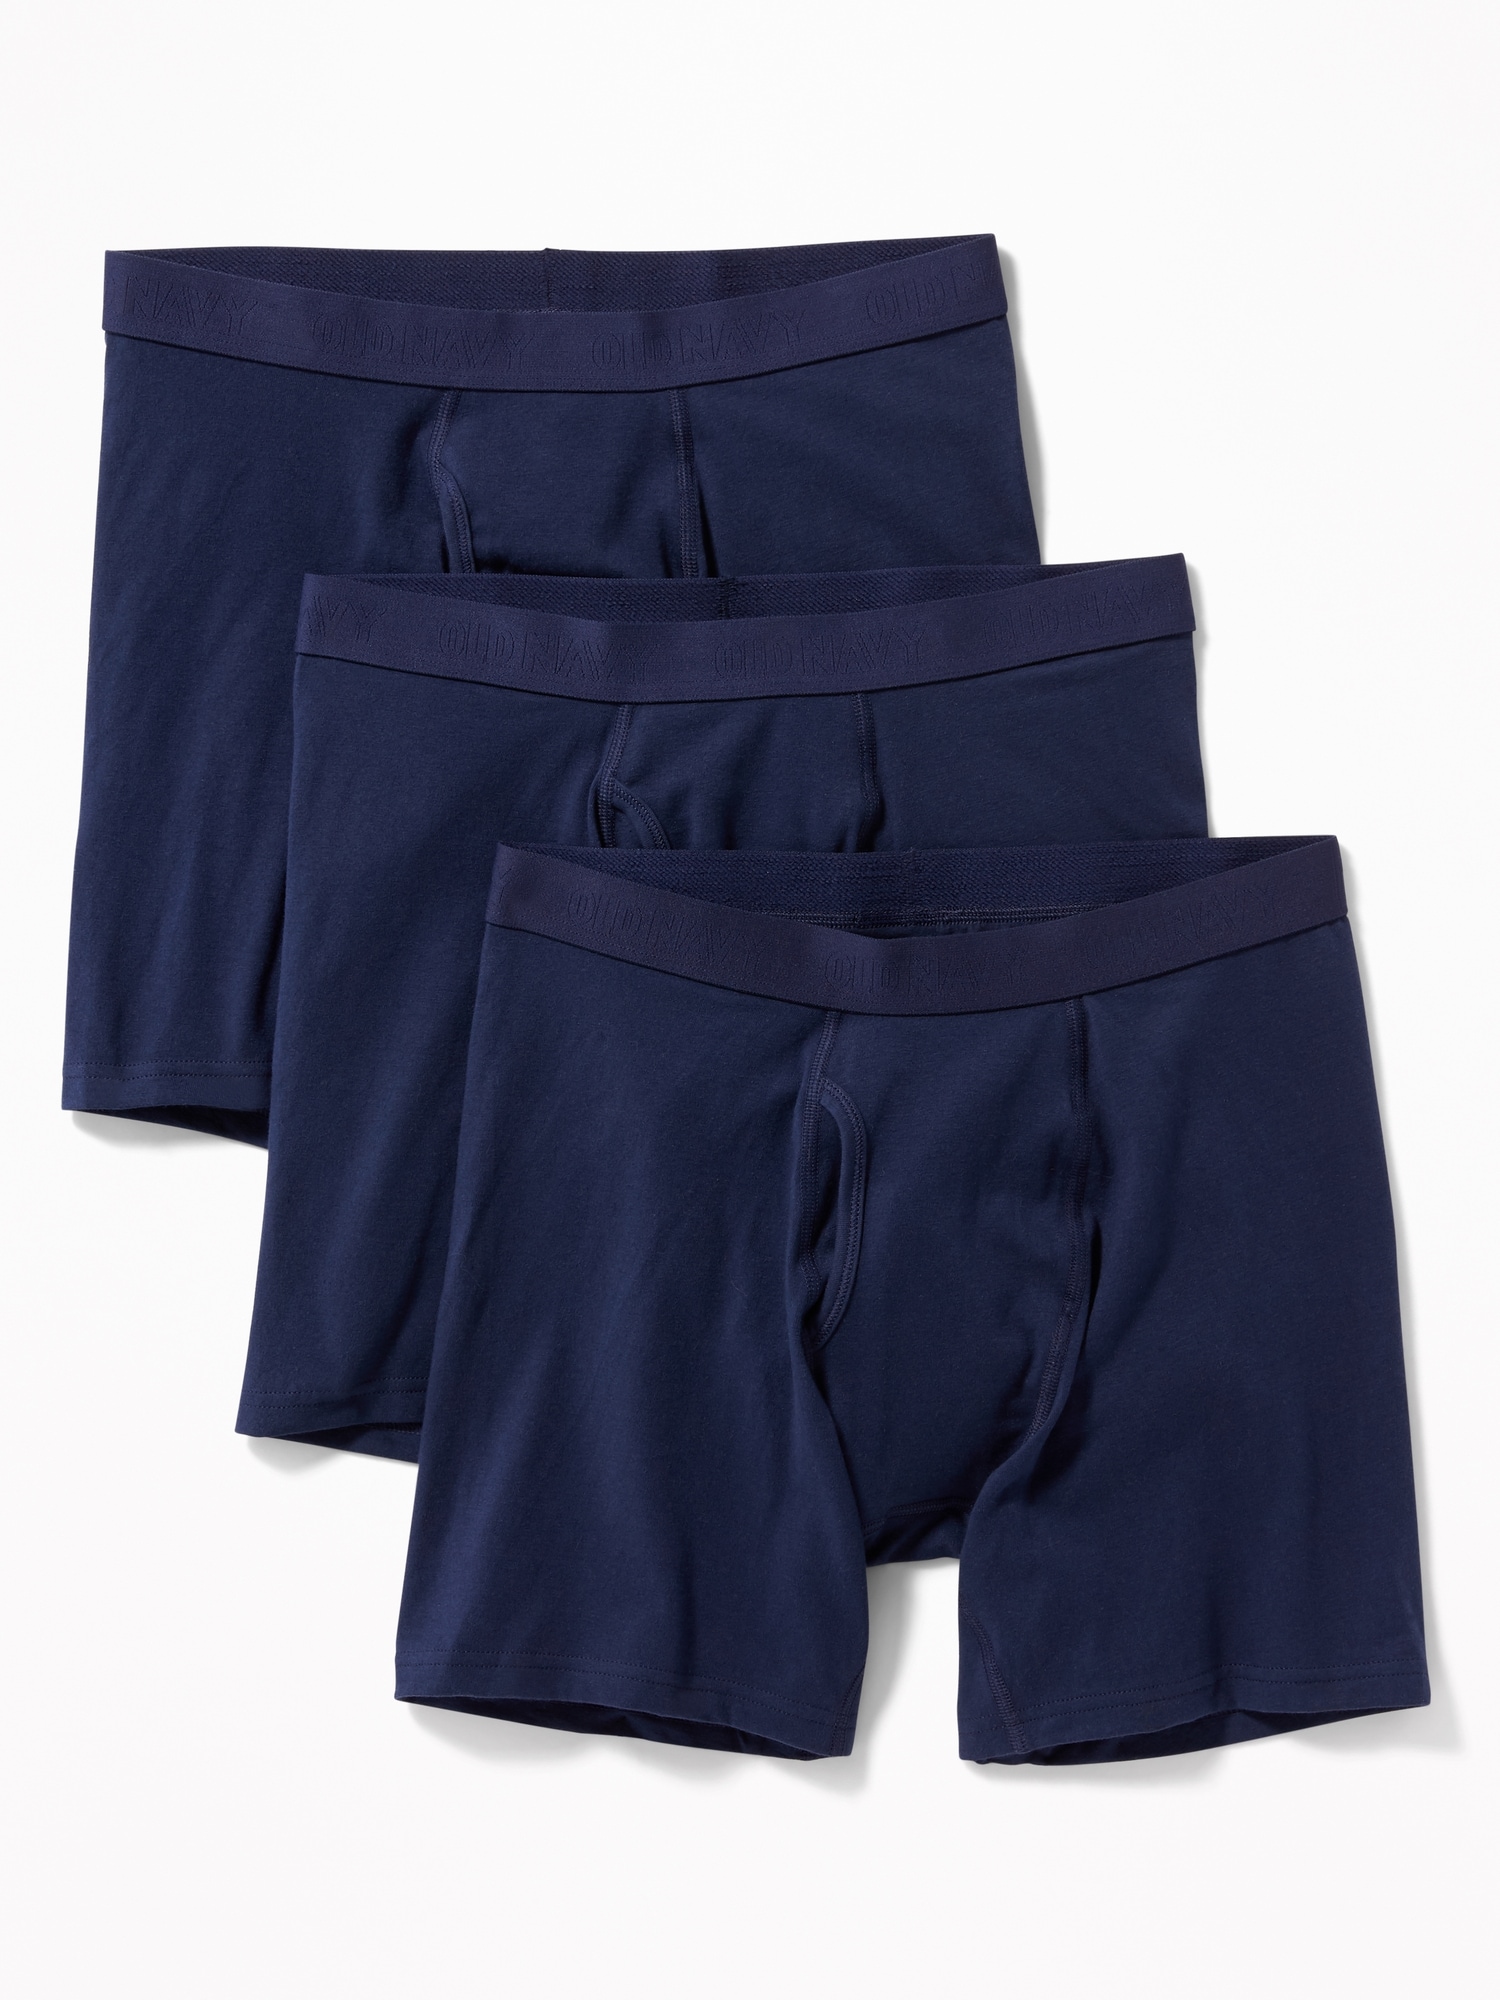 Find more Washed But Never Used Boys Underwear for sale at up to 90% off